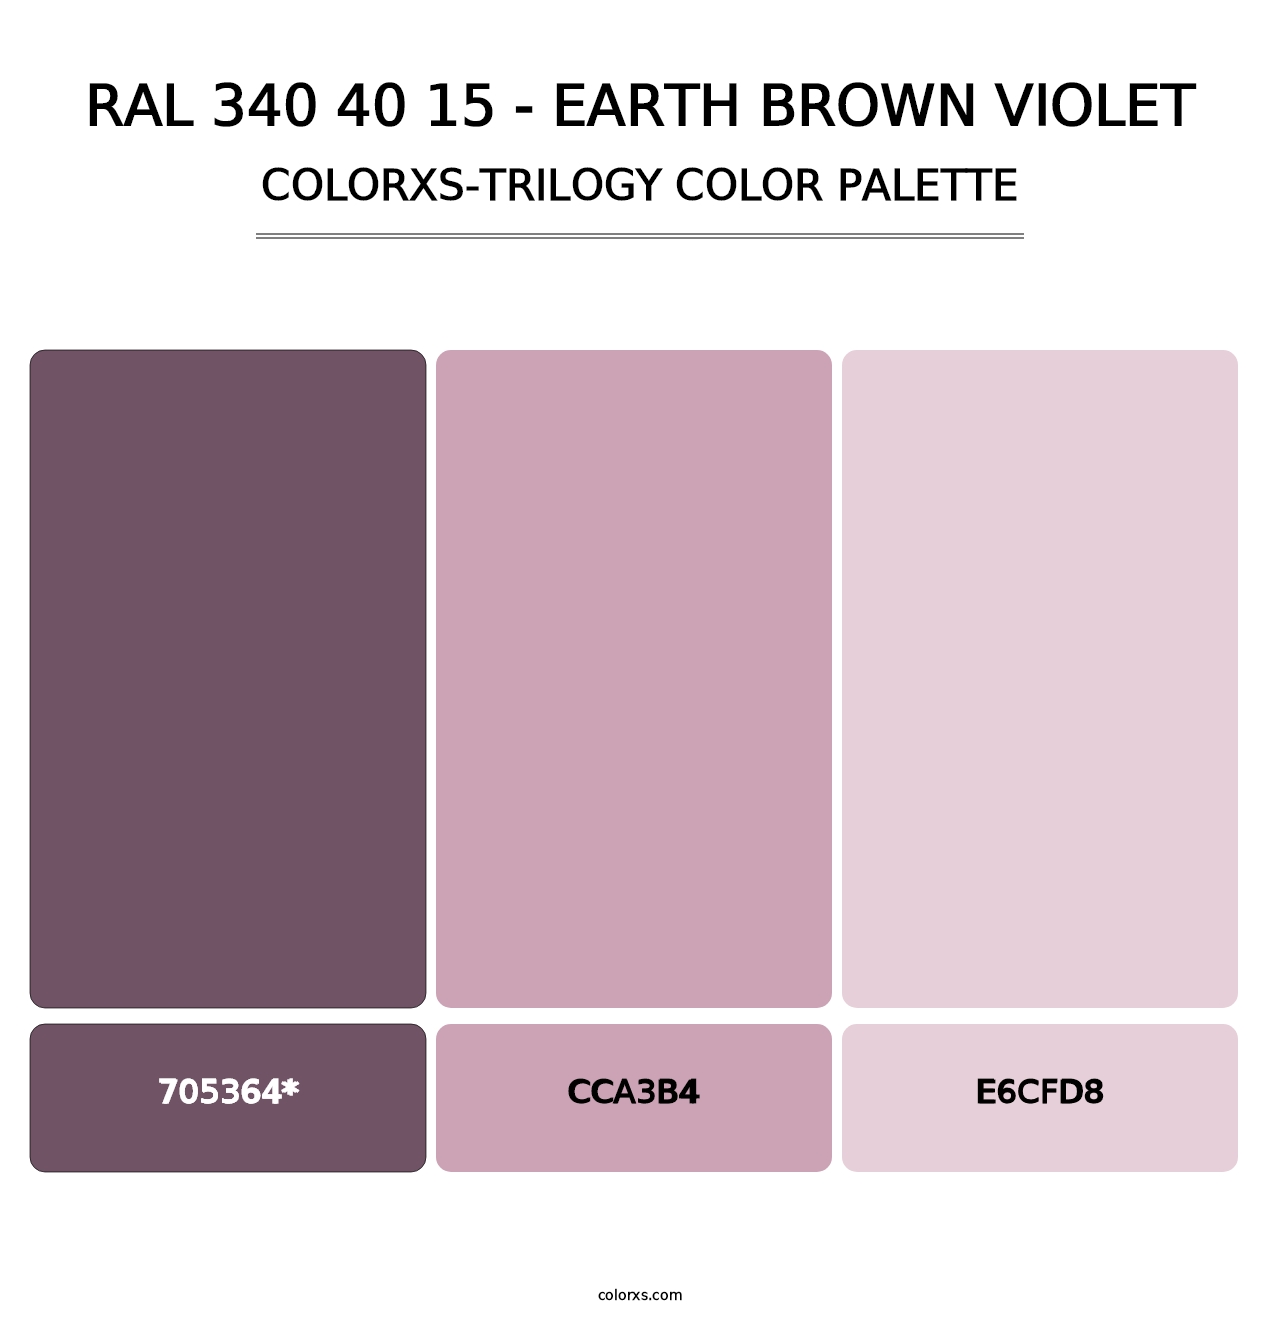 RAL 340 40 15 - Earth Brown Violet - Colorxs Trilogy Palette